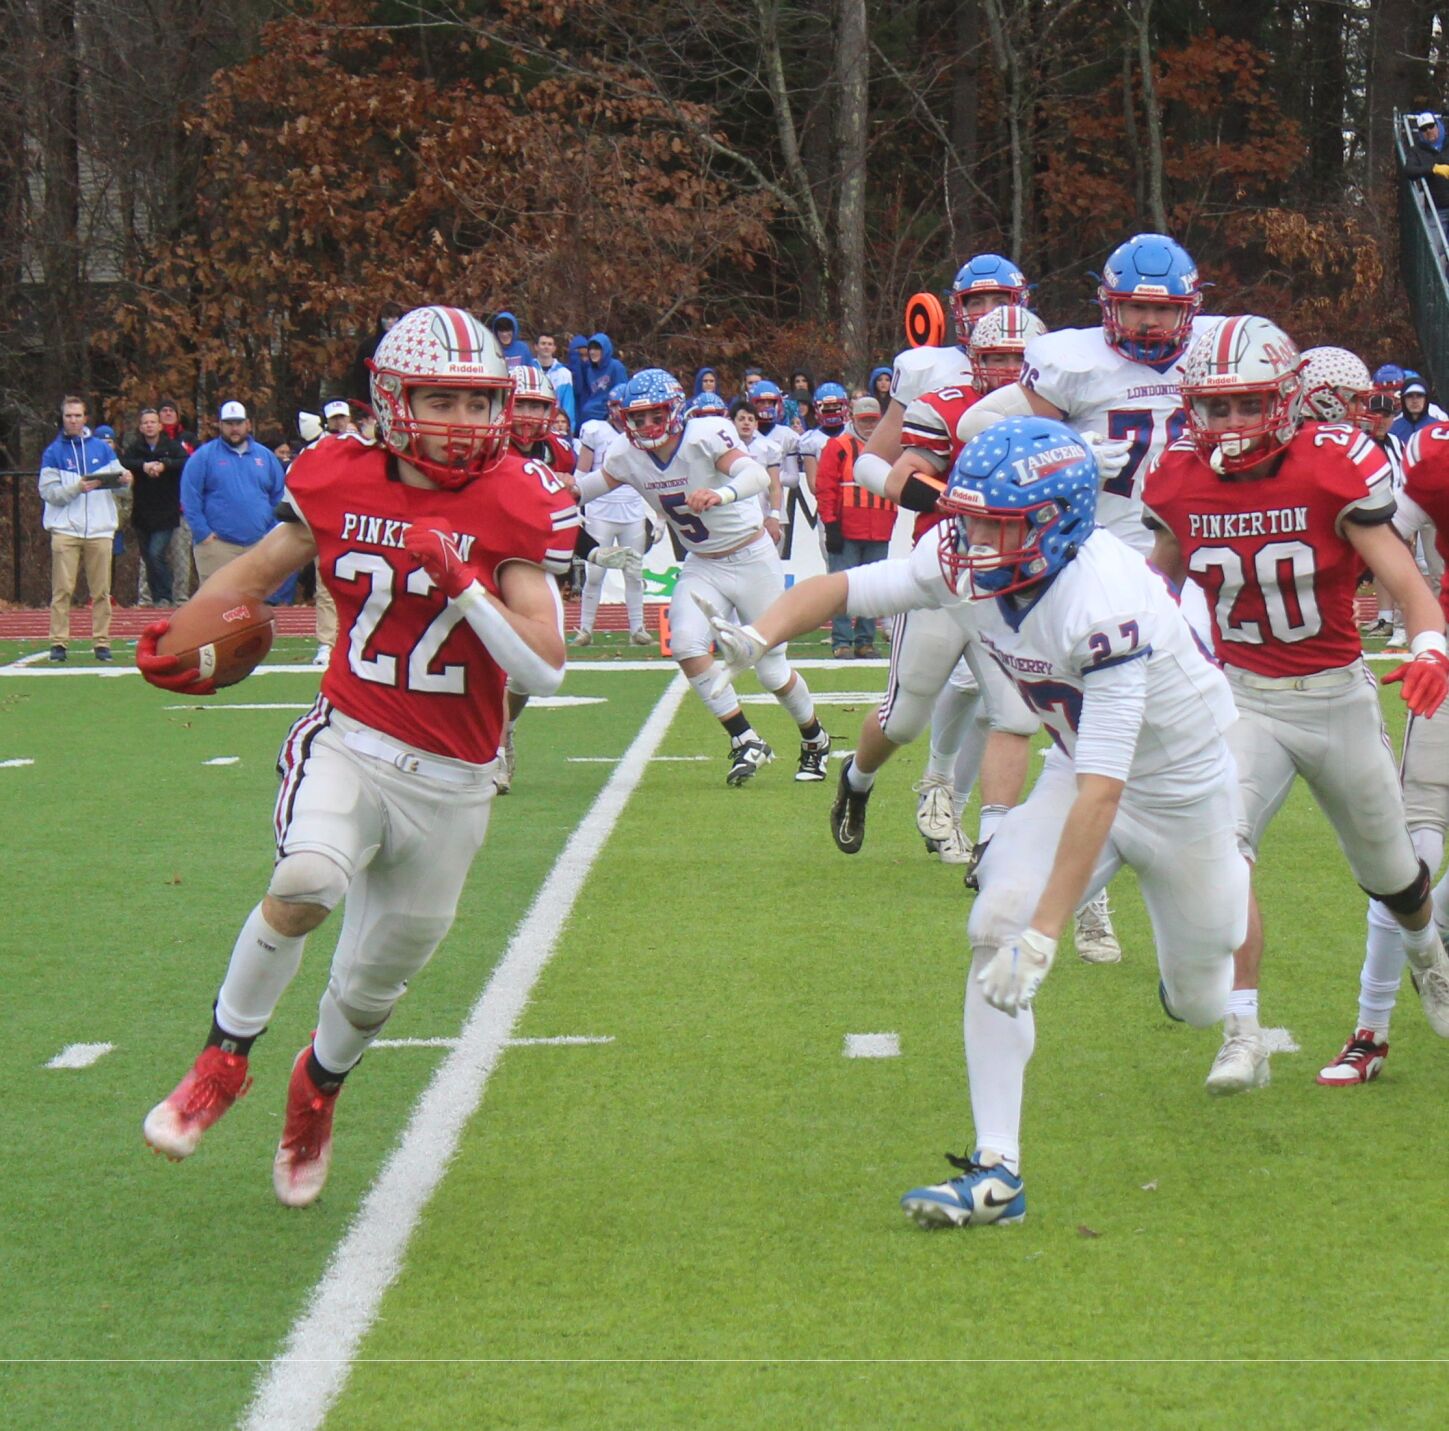 Londonderry Dominates Pinkerton Academy in Division I Semifinals, Hands Pinkerton First Loss